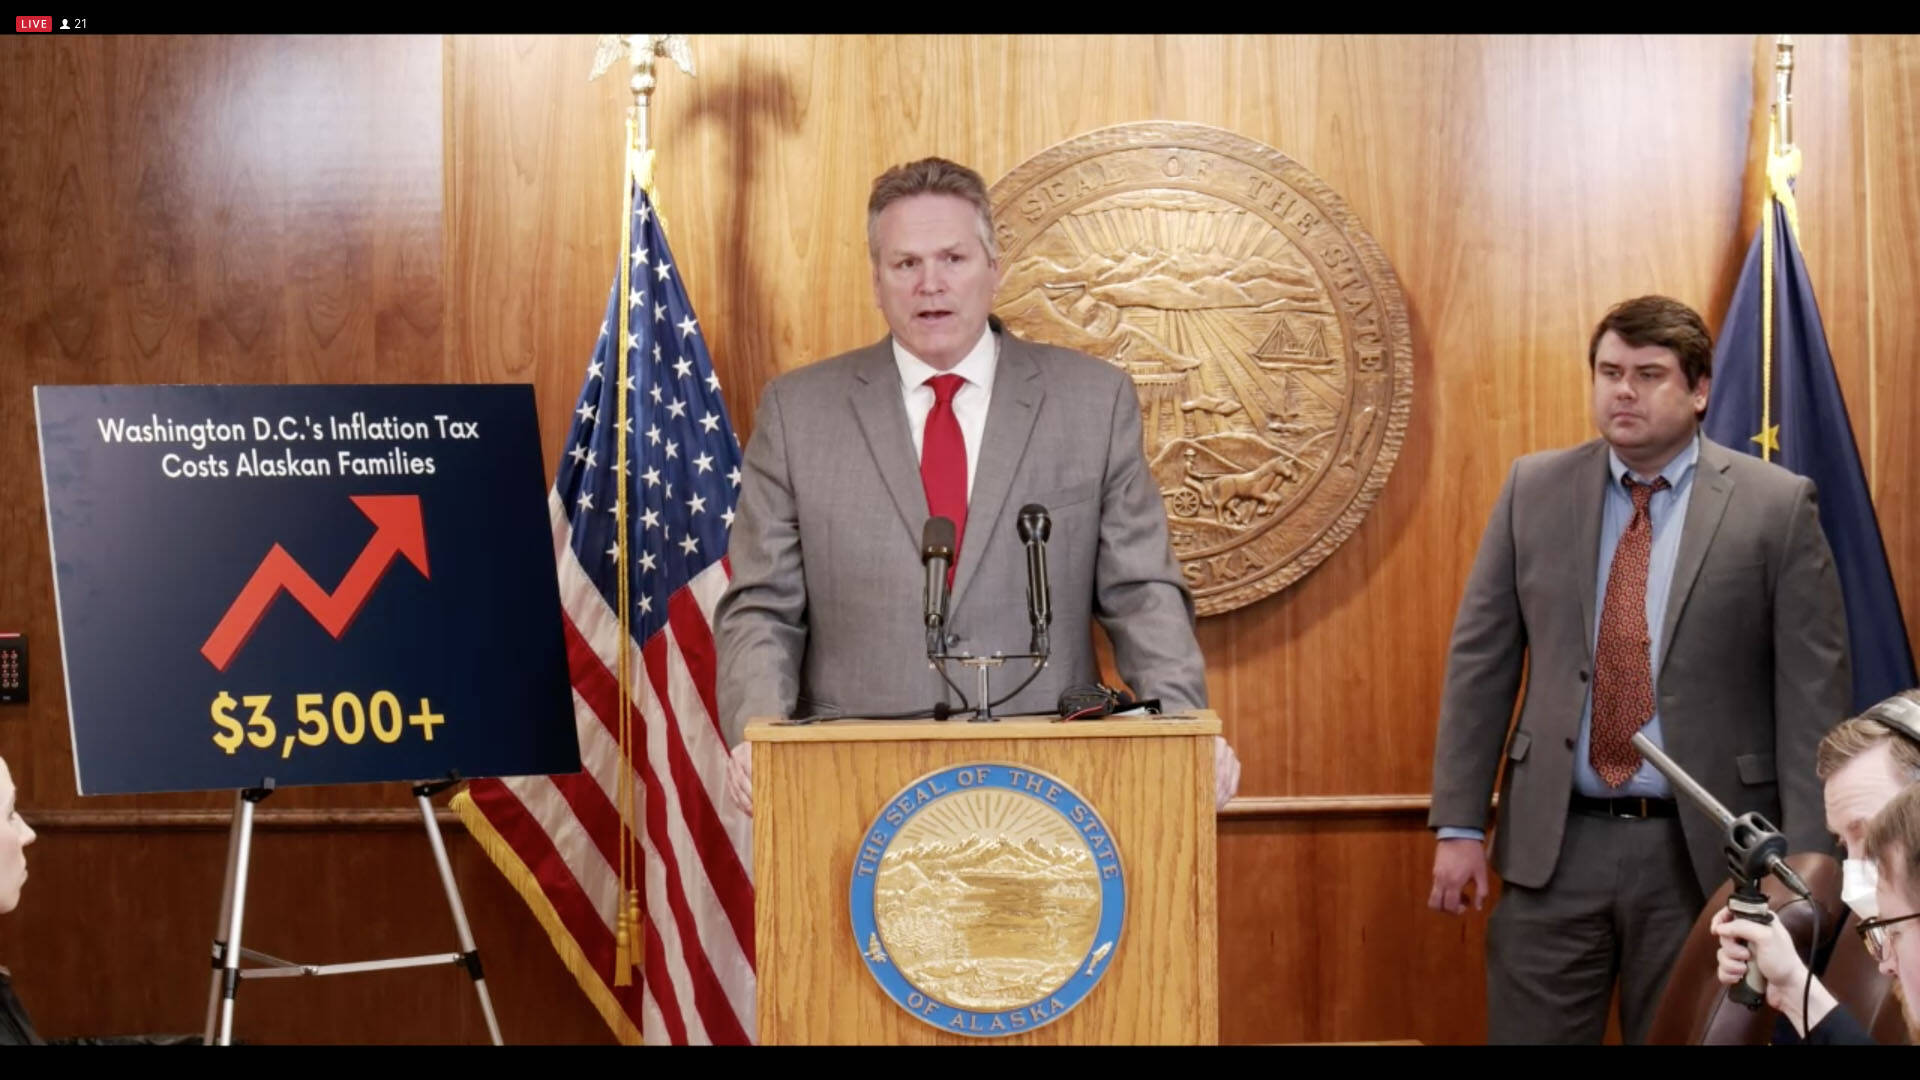 Gov. Mike Dunleavy speaks about state revenue during a press conference on Tuesday, March 15, 2022 in Juneau, Alaska. (Screenshot)